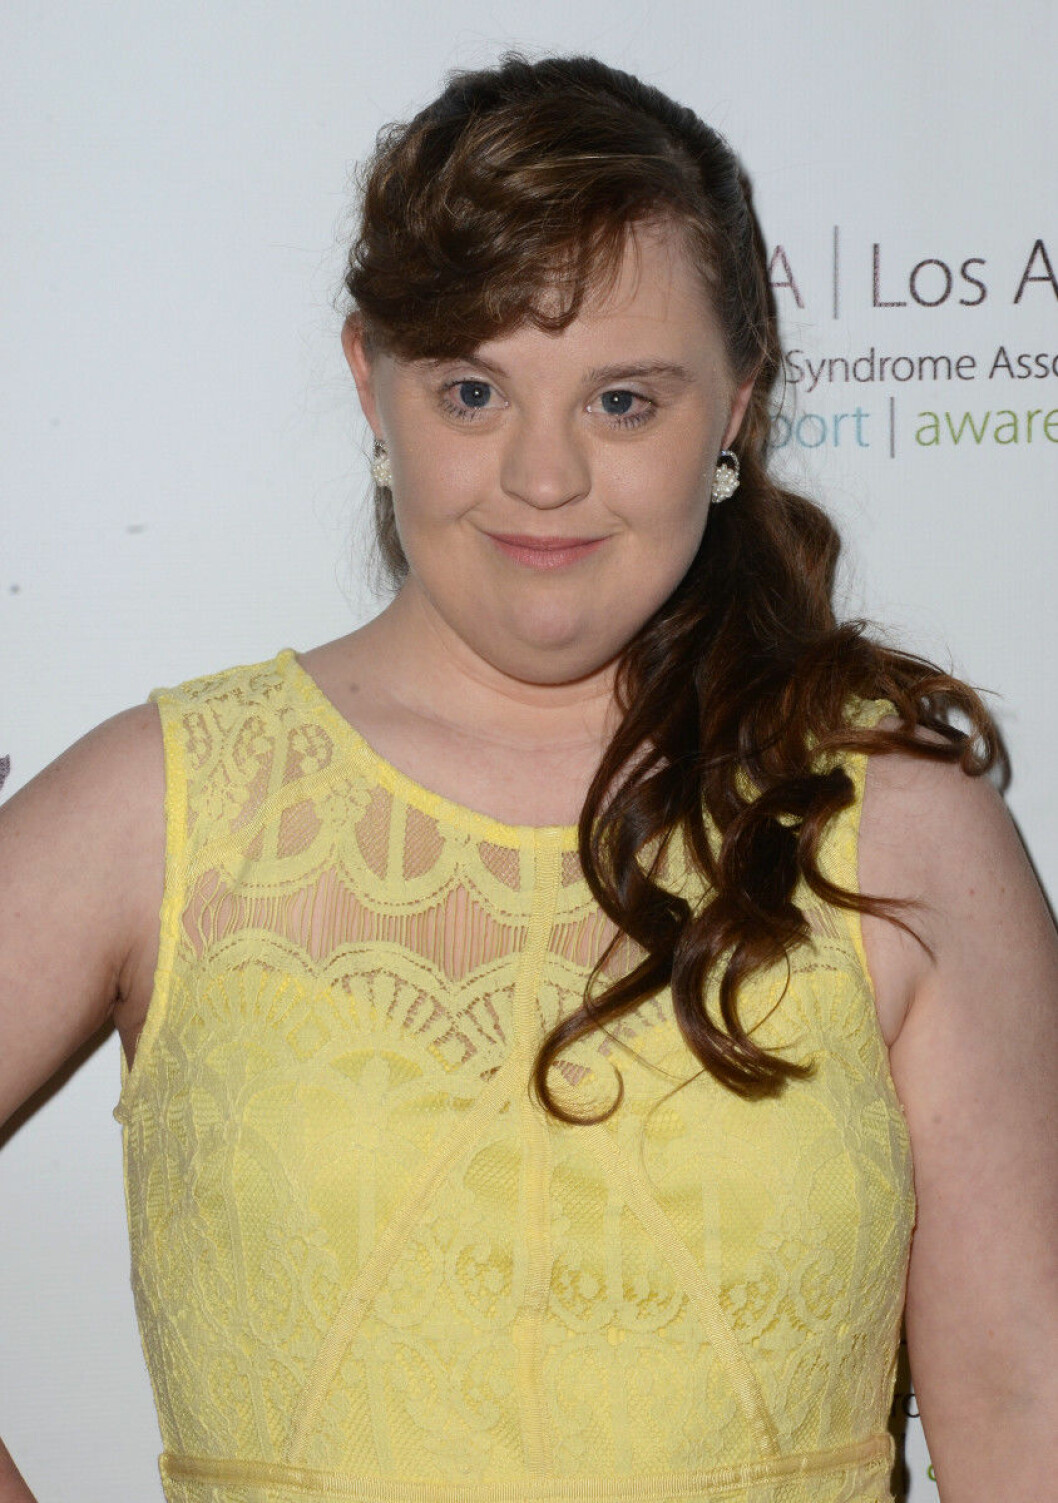 21 March 2016 - Sherman Oaks, California - World Down Syndrome Day celebrates with the premiere of "Kelly's Hollywood" held at ArcLight Sherman Oaks. Pictured: Jamie Brewer Ref: SPL1250523 210316 Picture by: AdMedia / Splash News Splash News and Pictures Los Angeles: 310-821-2666 New York: 212-619-2666 London: 870-934-2666 photodesk@splashnews.com 